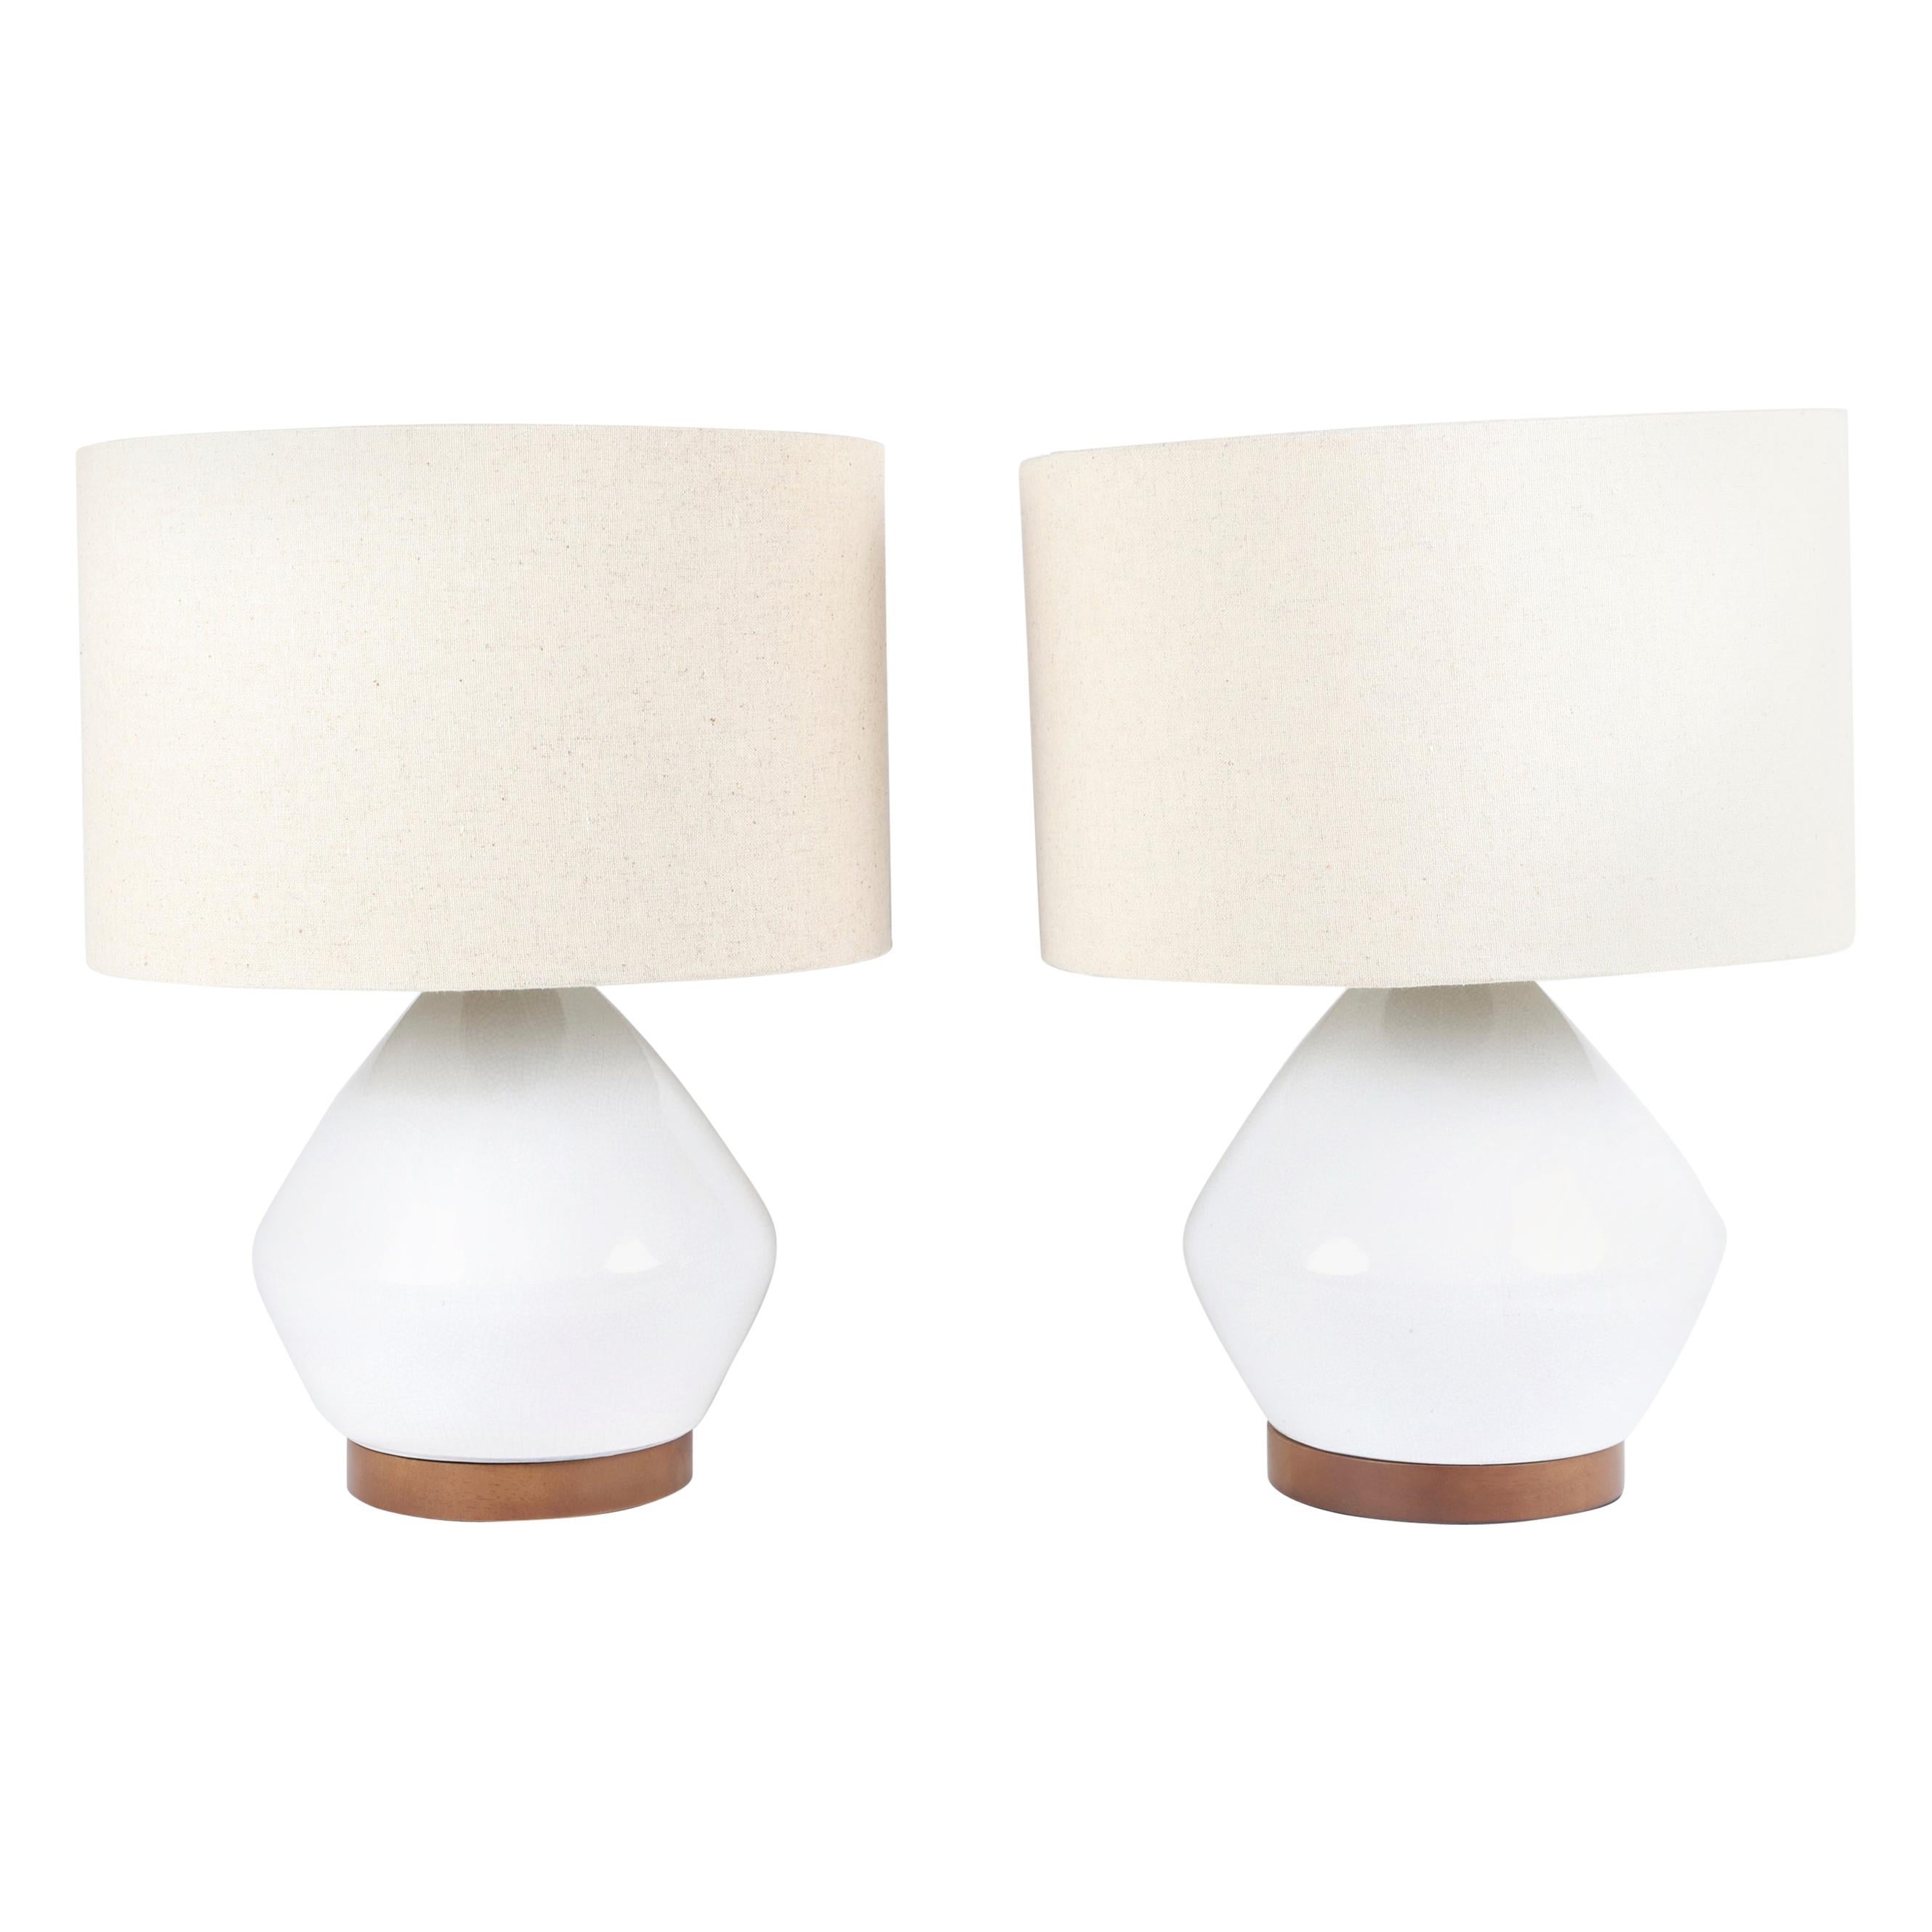 Pair of White Ceramic Lamps Crackle with Beige Shades